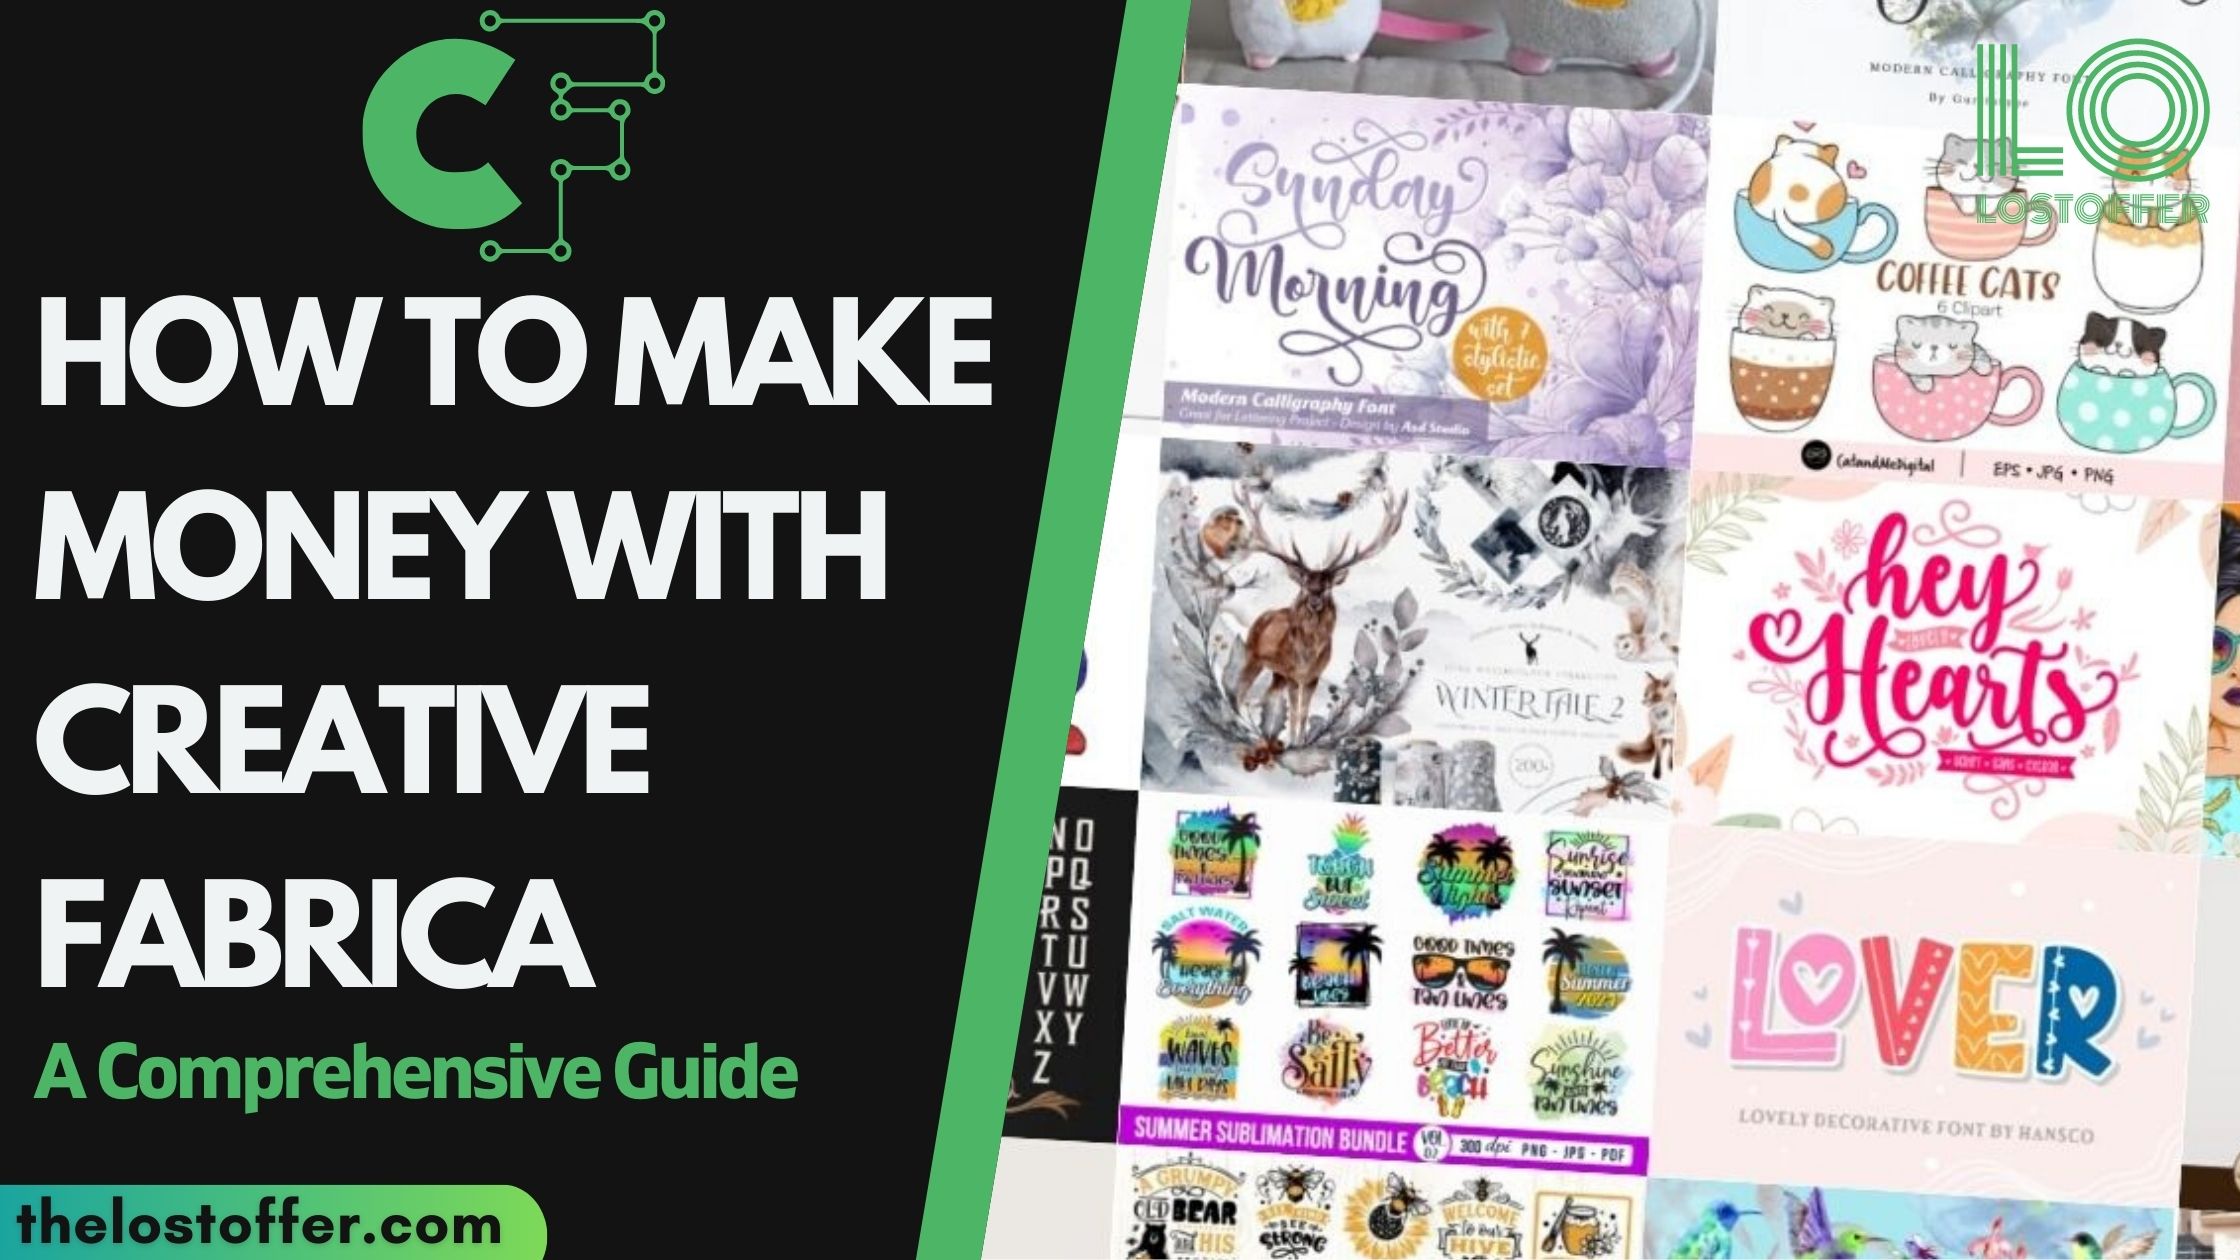 How To Make Money With Creative Fabrica: A Comprehensive Guide - THELOSTOFFER